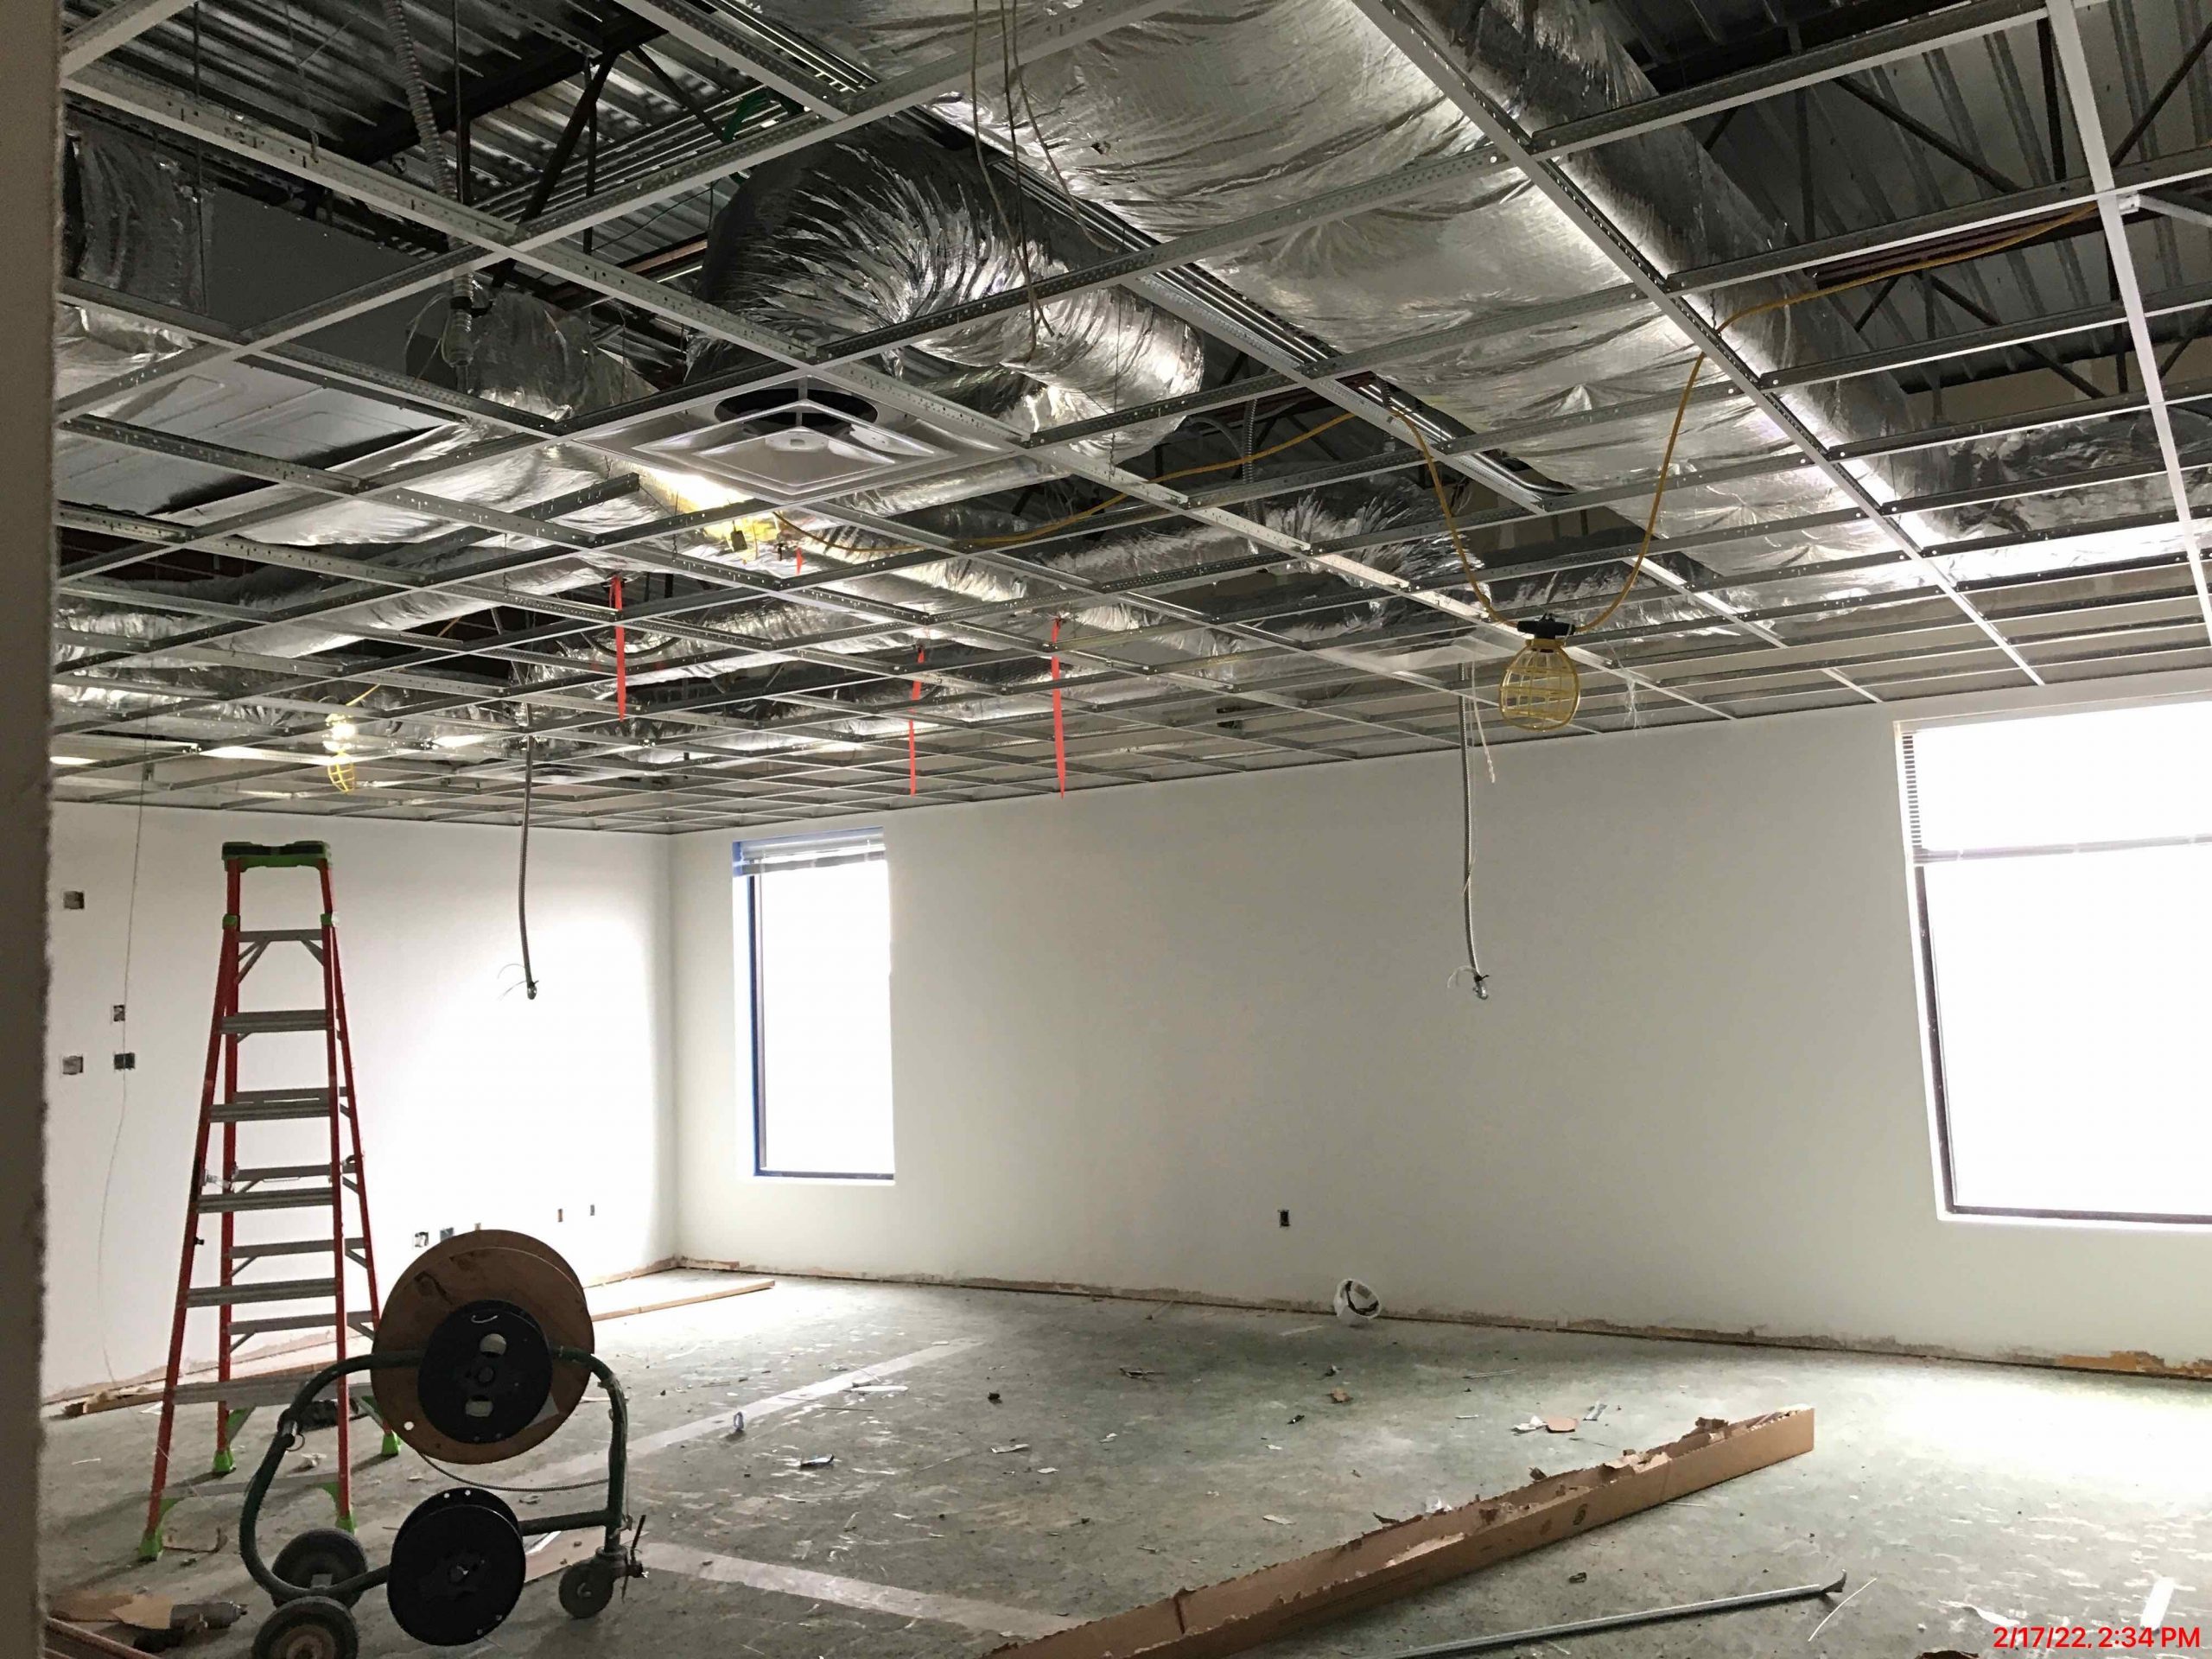 New Ceilings & Classroom image 1